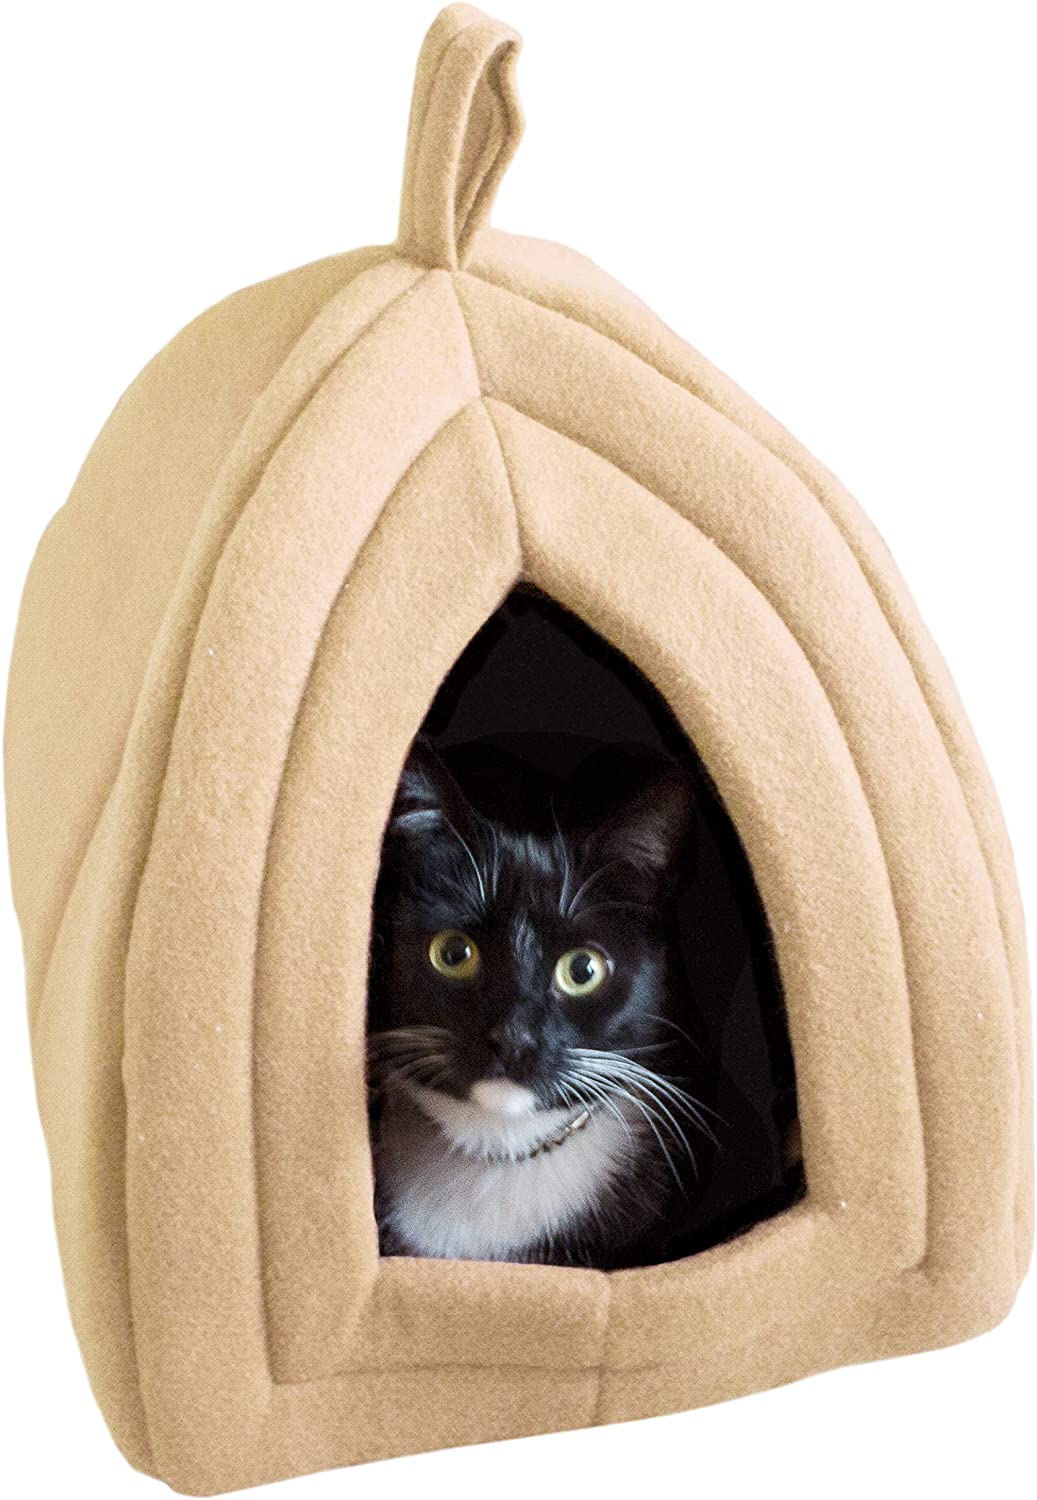 8. Petmaker Cat House with Removable Foam Cushion